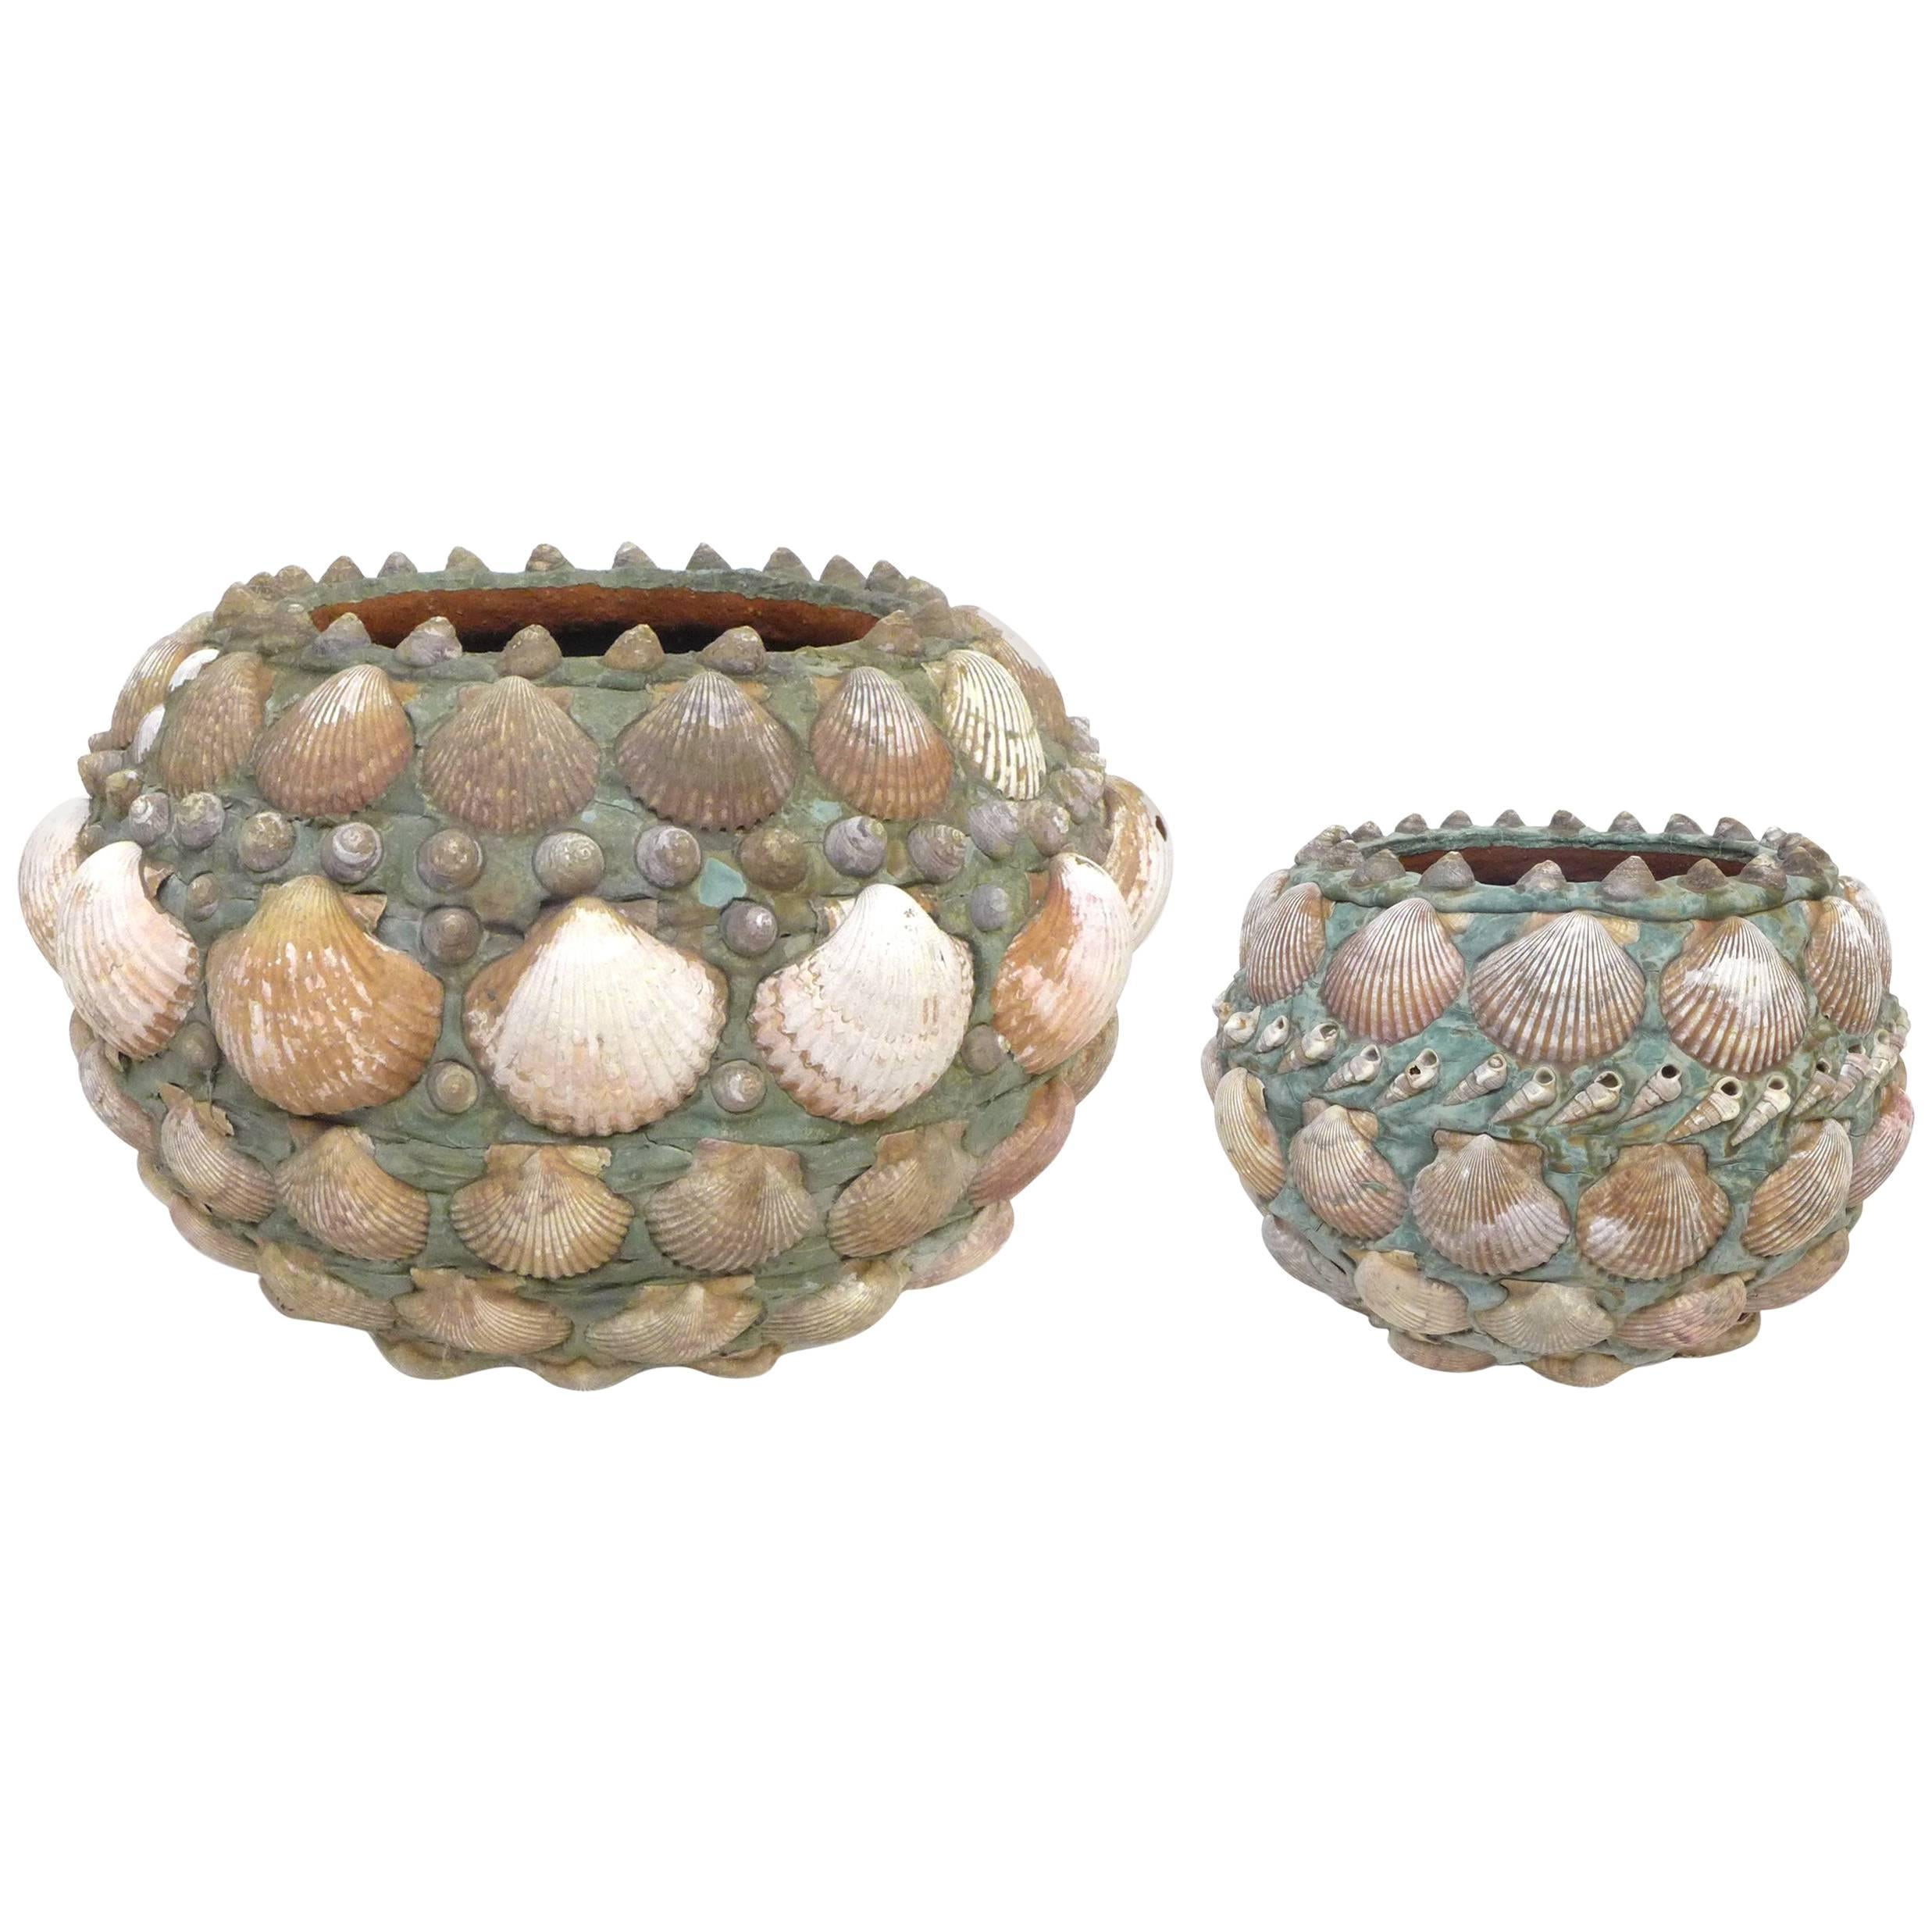 A fantastic, seashell-encrusted terra cotta planter.  An eye-catching, likely Folk Art vessel fully and thoughtfully clad (including underneath) in various shells applied atop an aquamarine substrate.  Fantastic patina from life outdoors.  A fun and